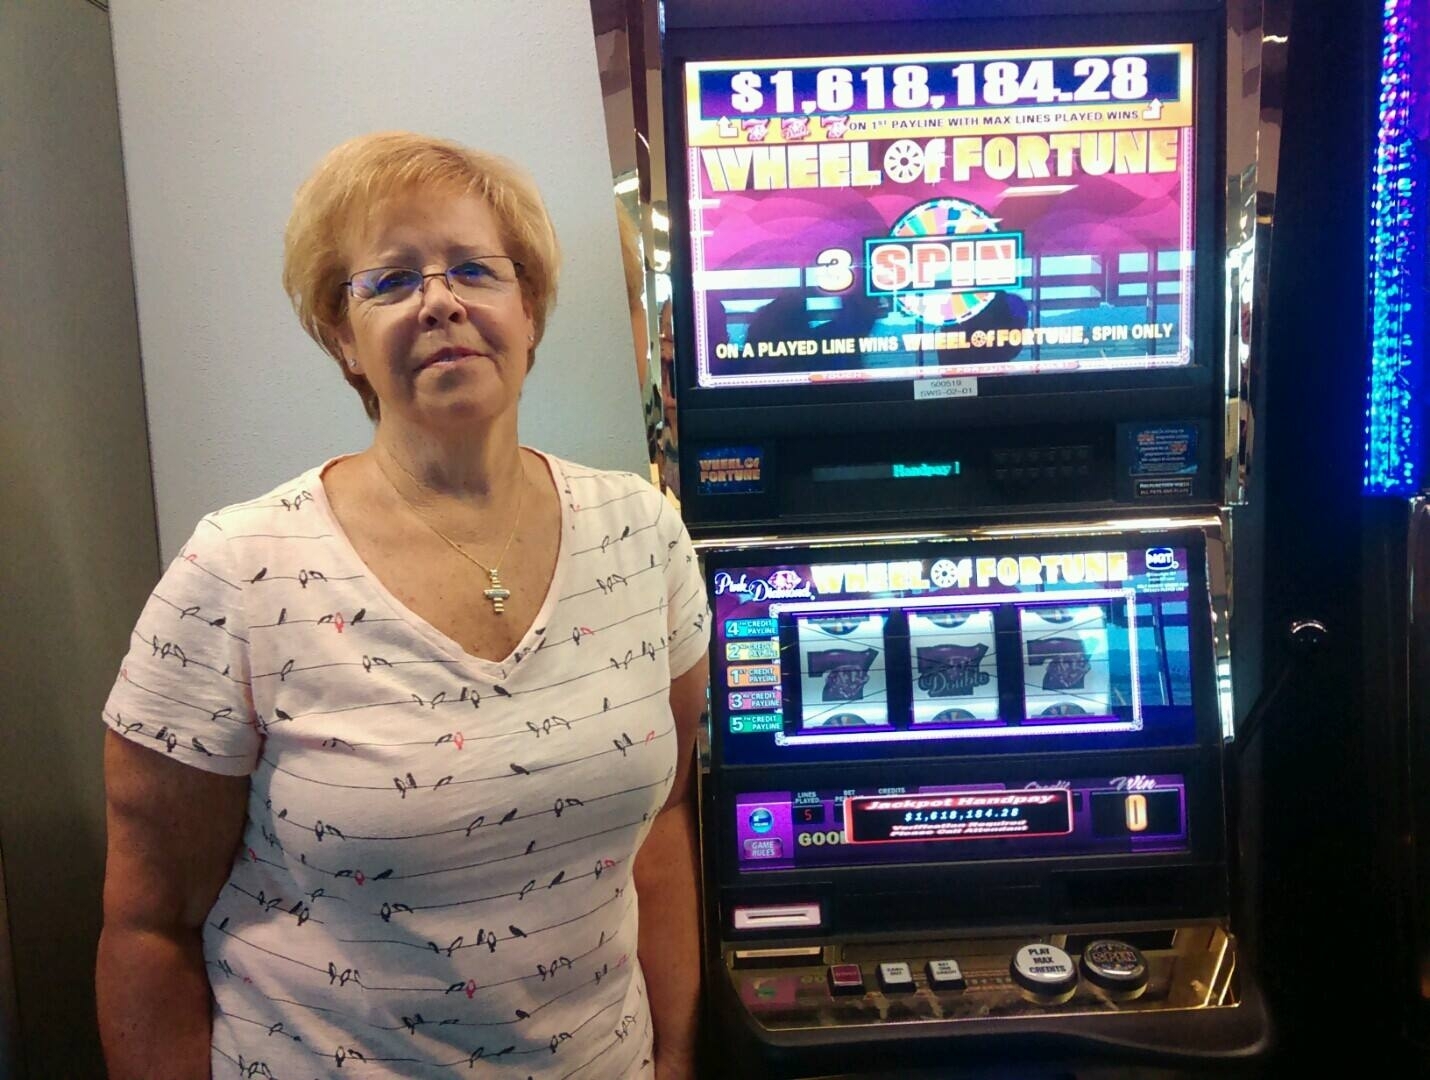 Woman wins $1.6m Wheel of Fortune jackpot while waiting in Las Vegas airport1430 x 1080